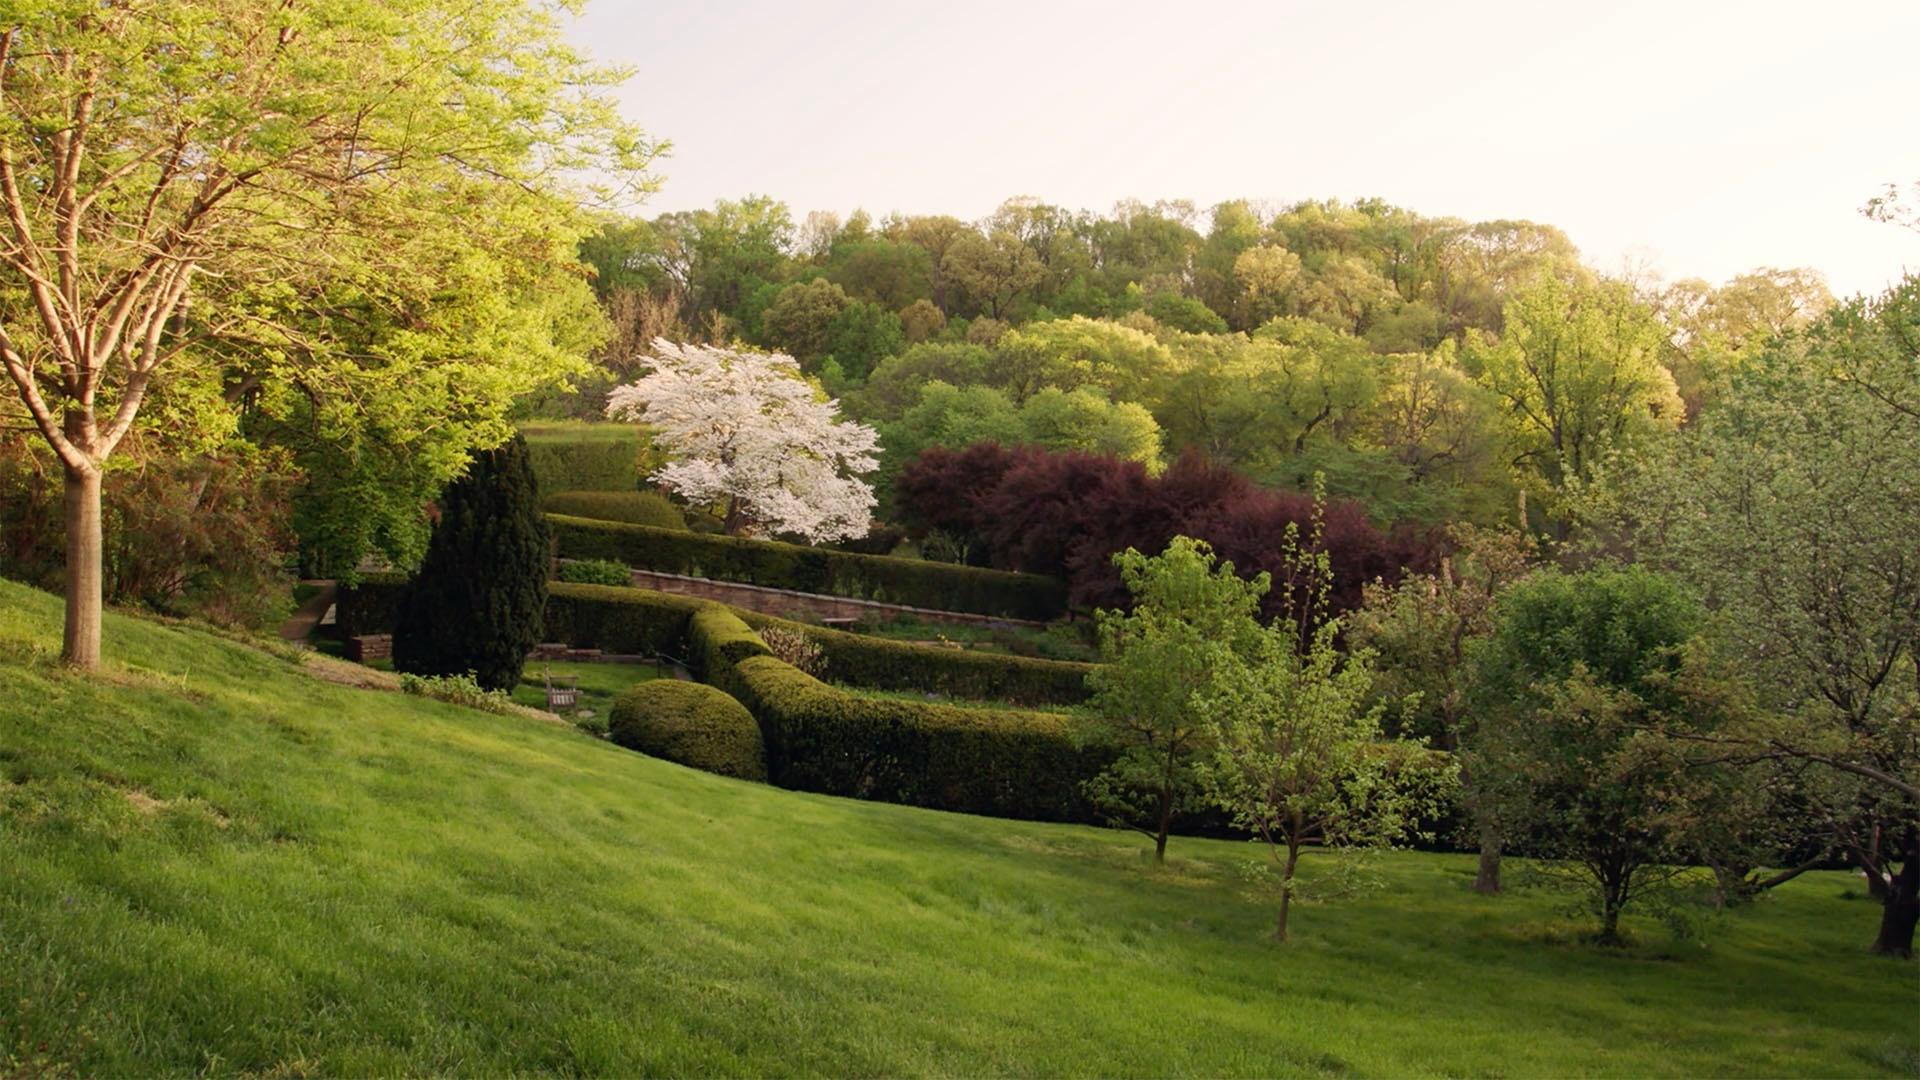 A view across formal gardens and into the park beyond at Dumbarton Oaks in Washington, DC.